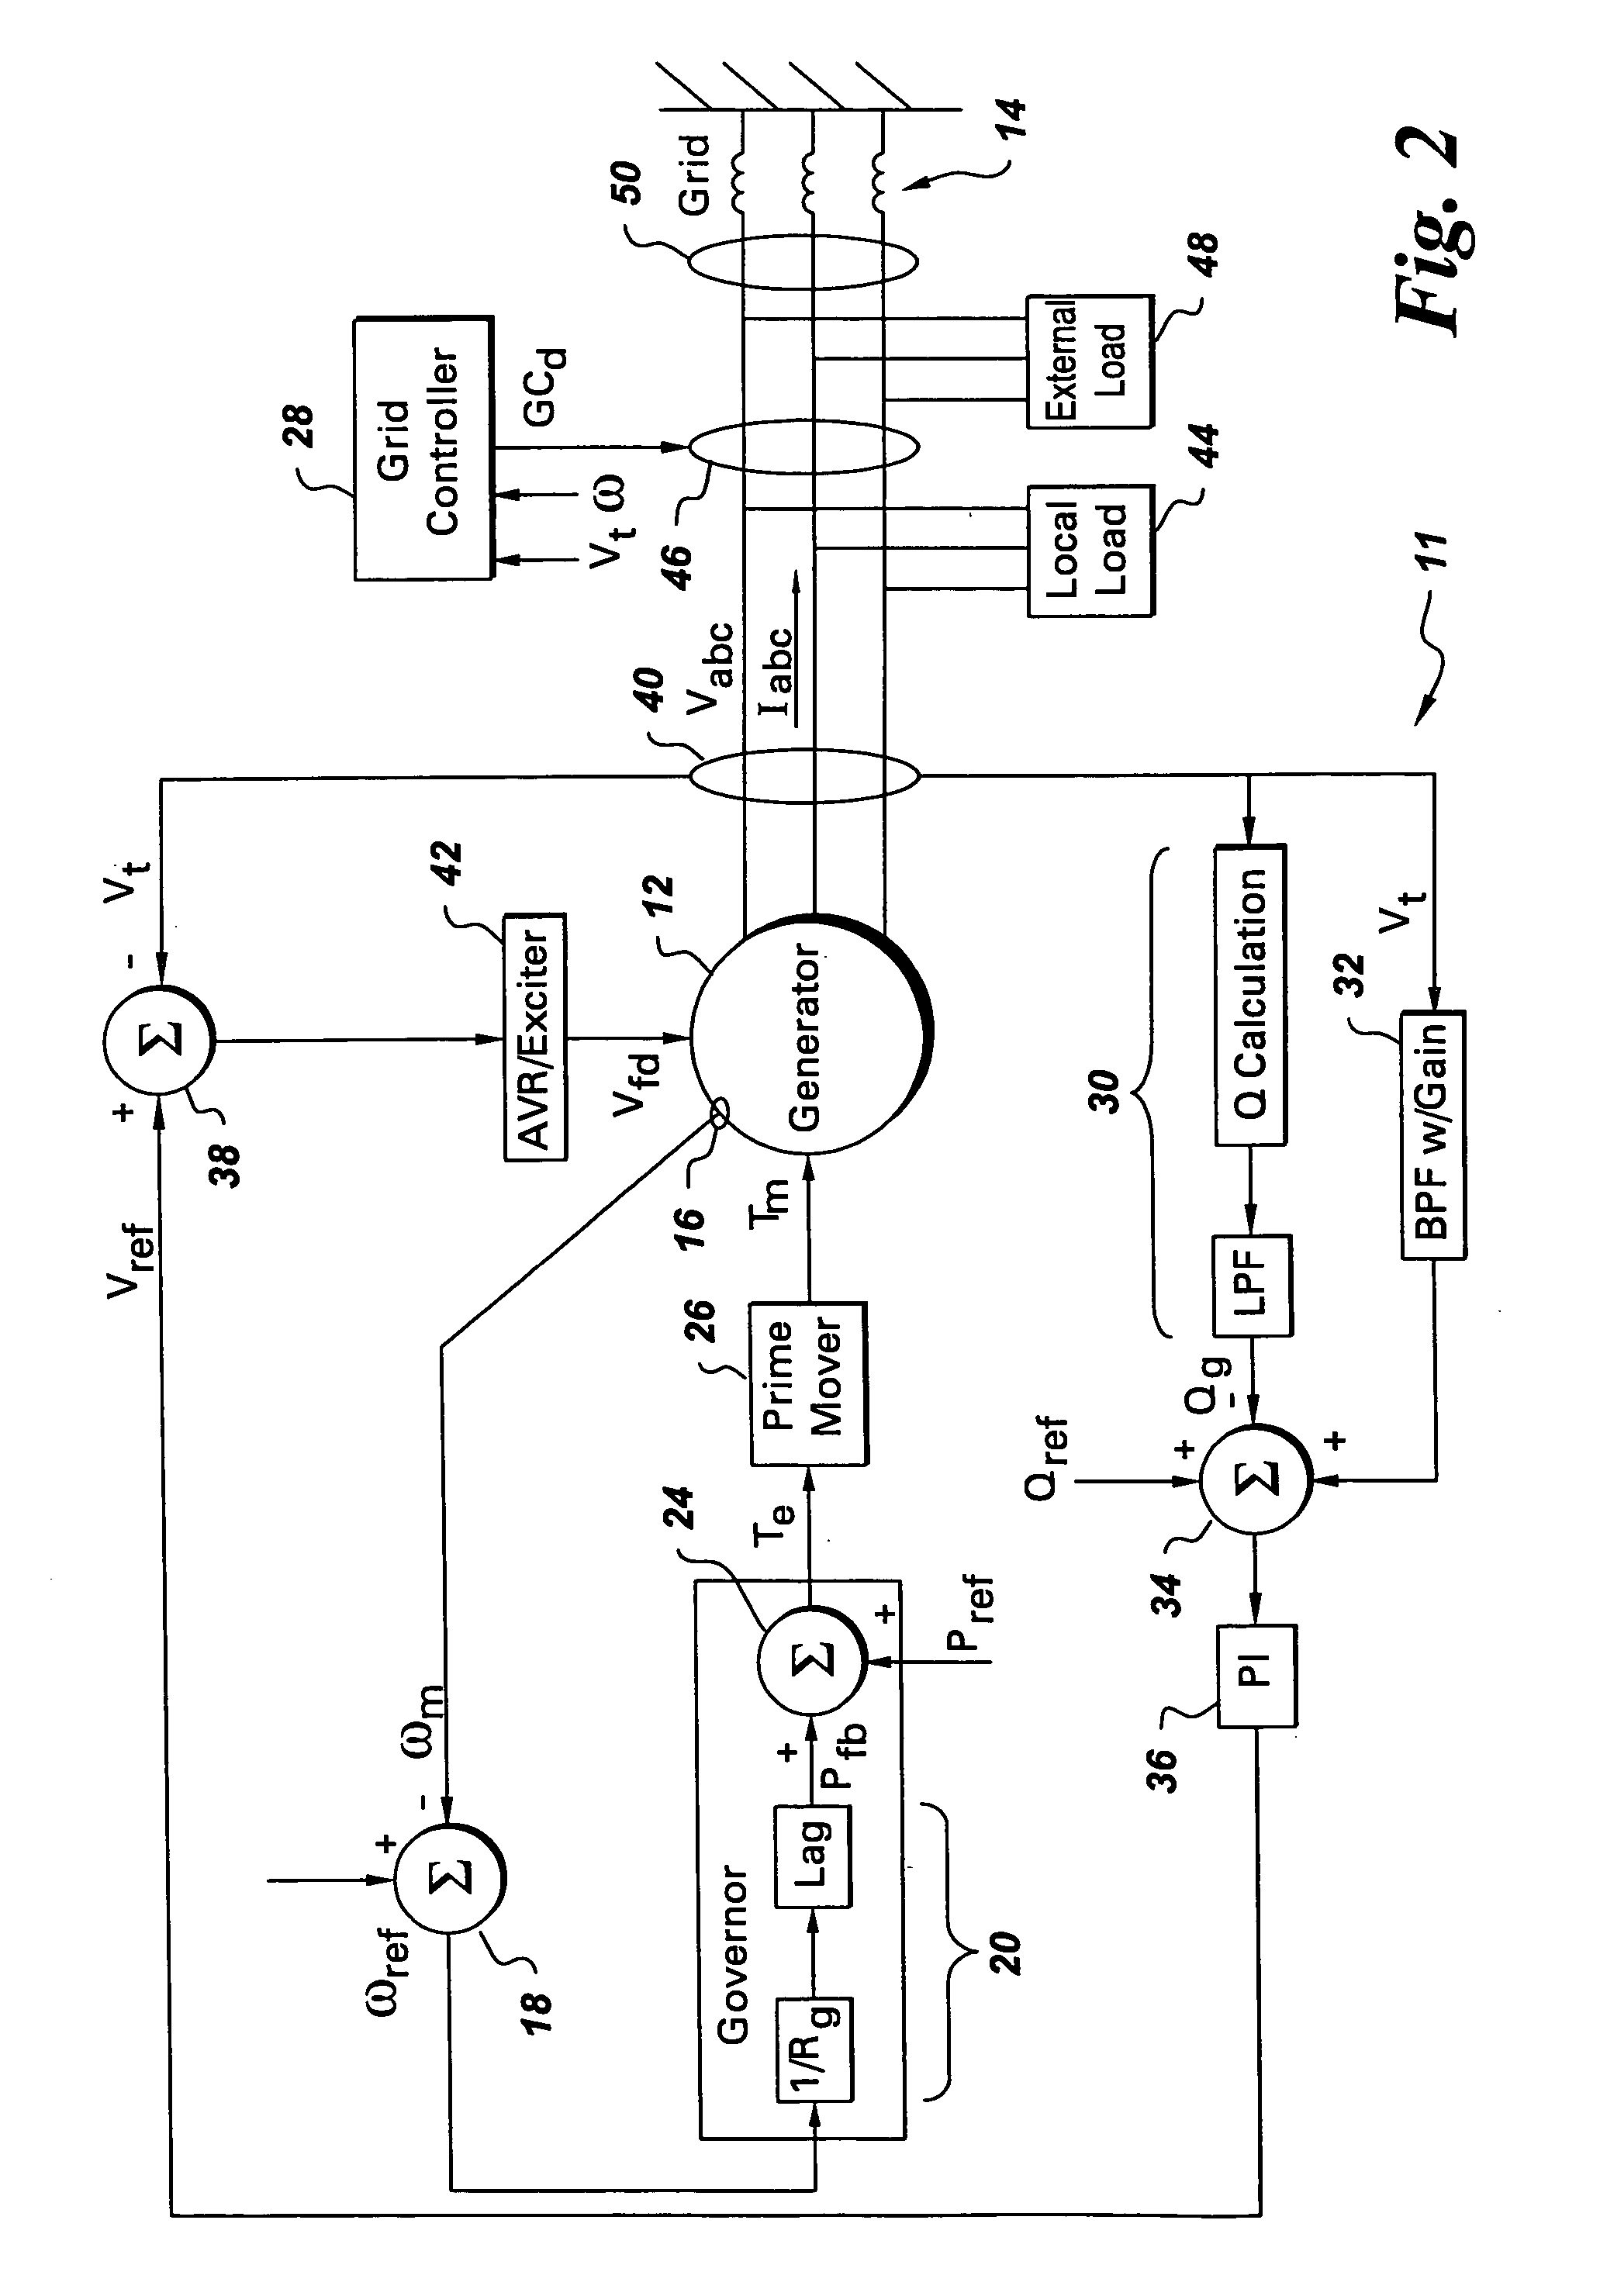 Anti-islanding protection systems for synchronous machine based distributed generators